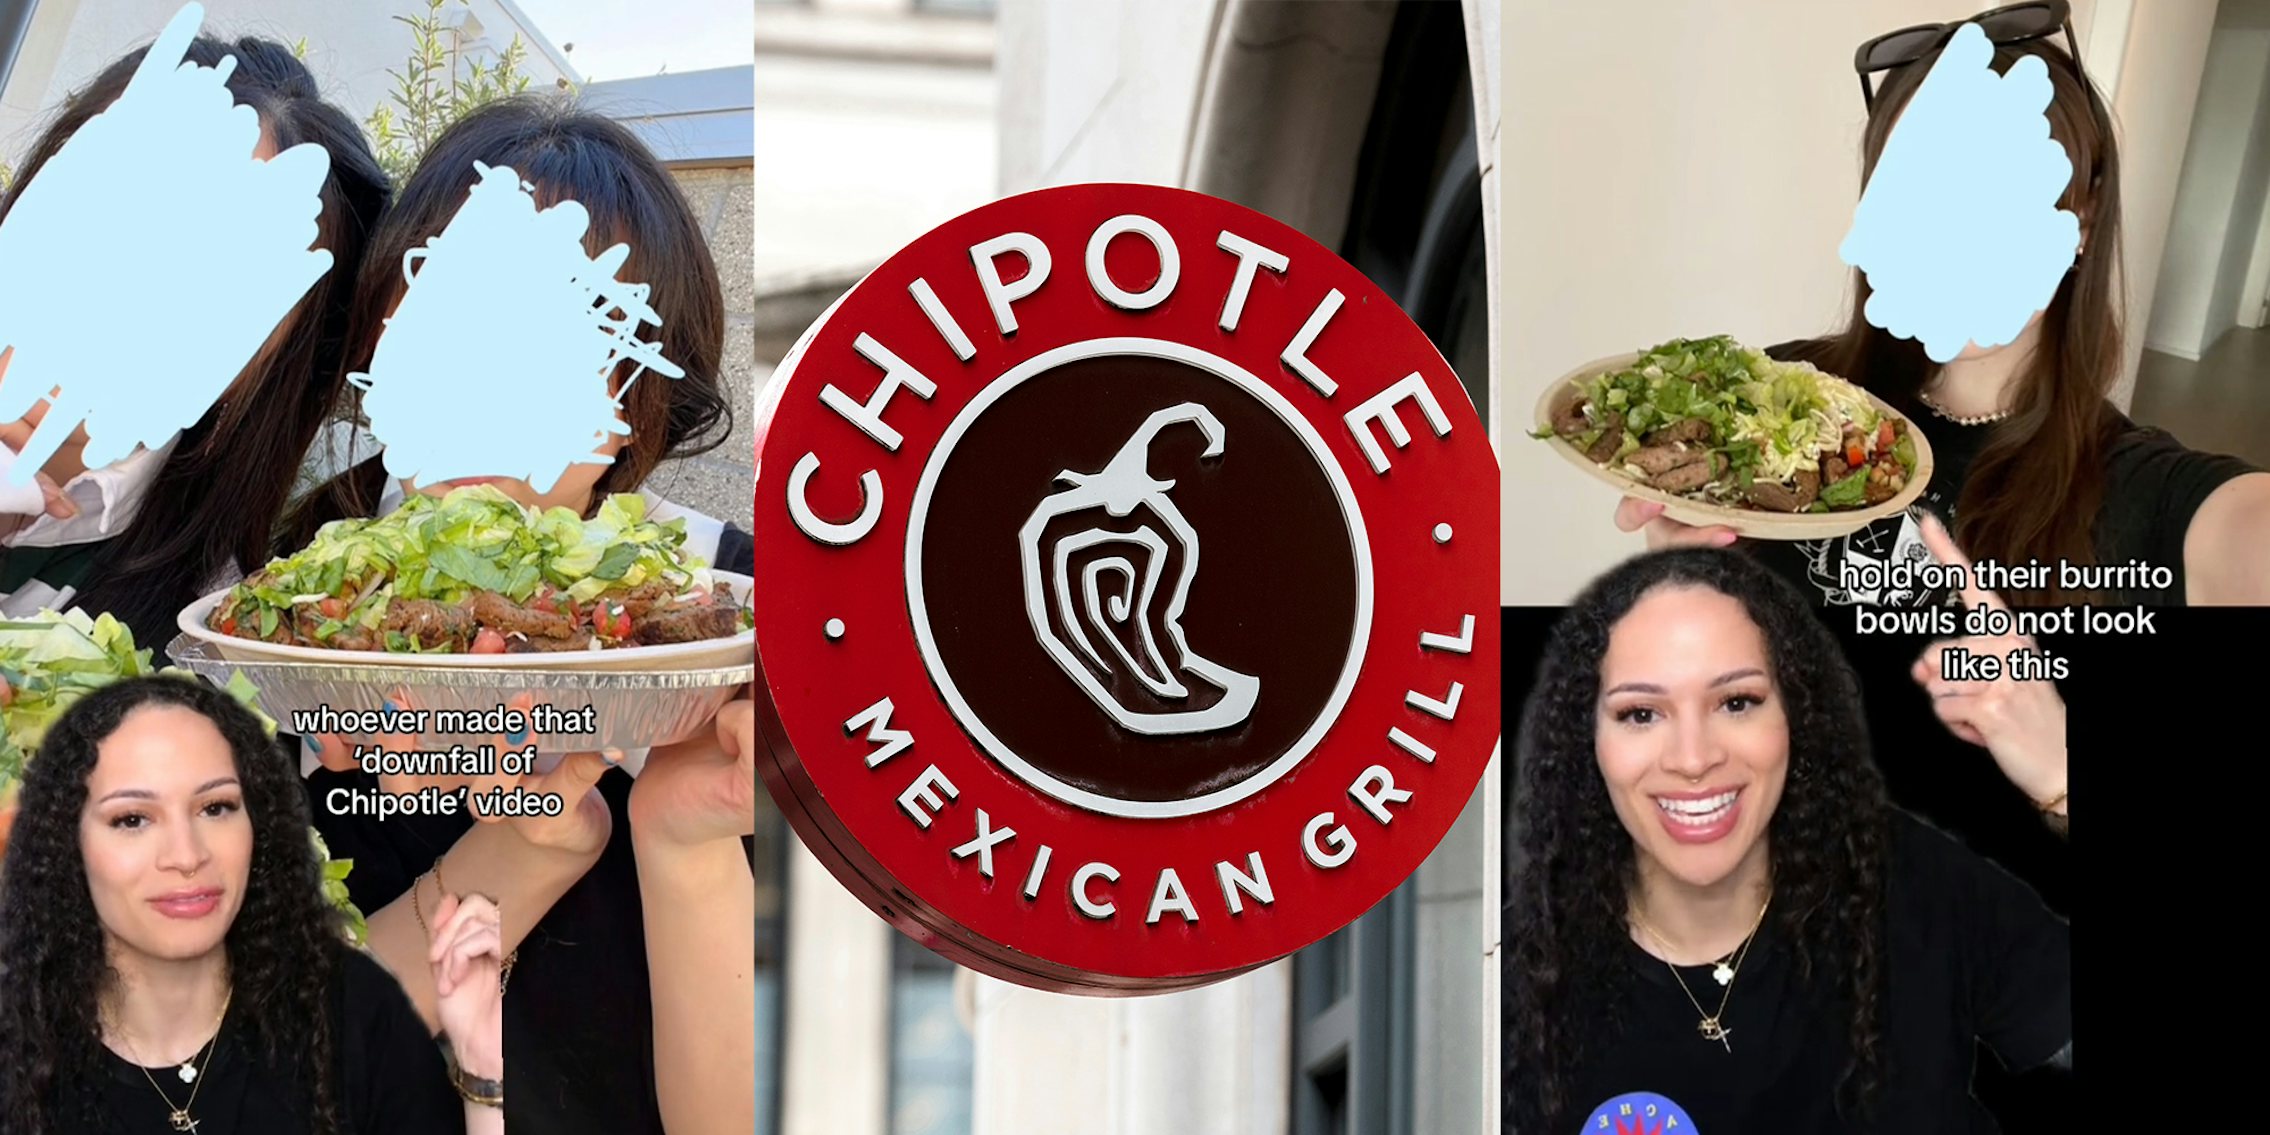 Customer accuses Chipotle of gaslighting them by giving influencers 'huge' burrito bowls